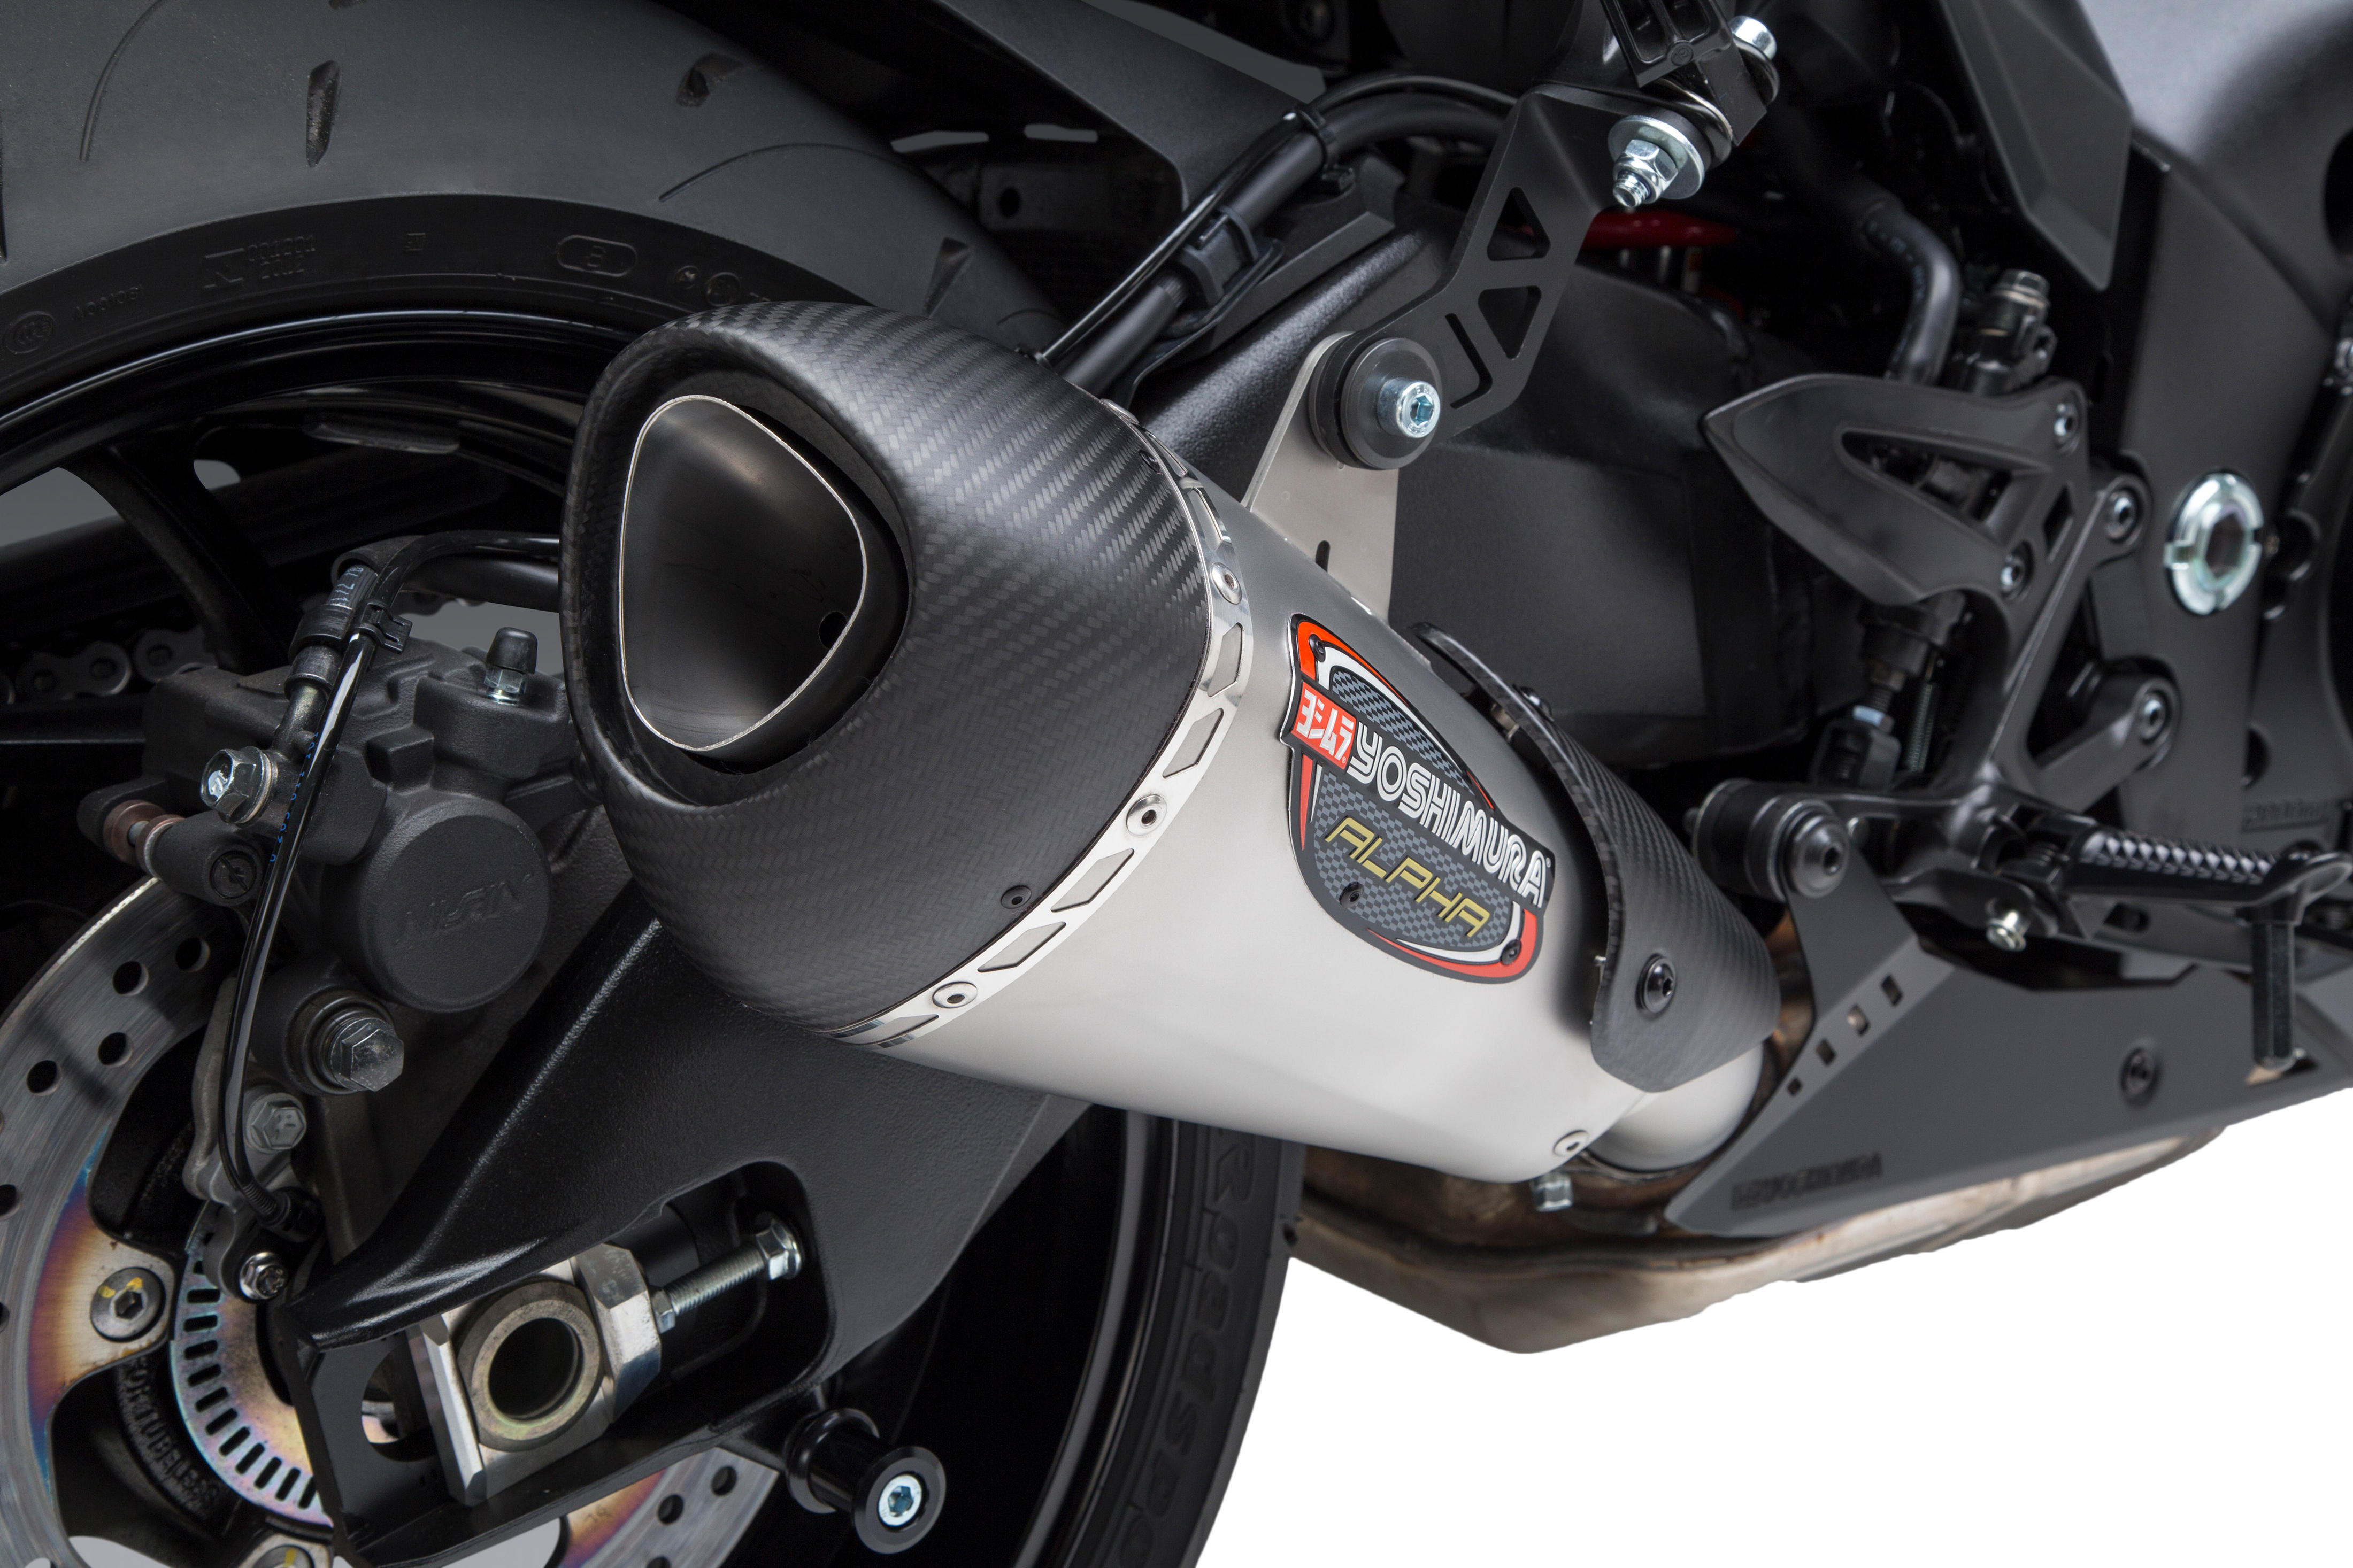 Alpha T Street Stainless Steel Slip On Exhaust Carbon Fiber Cap - For 2020 GS1000S Katana - Click Image to Close